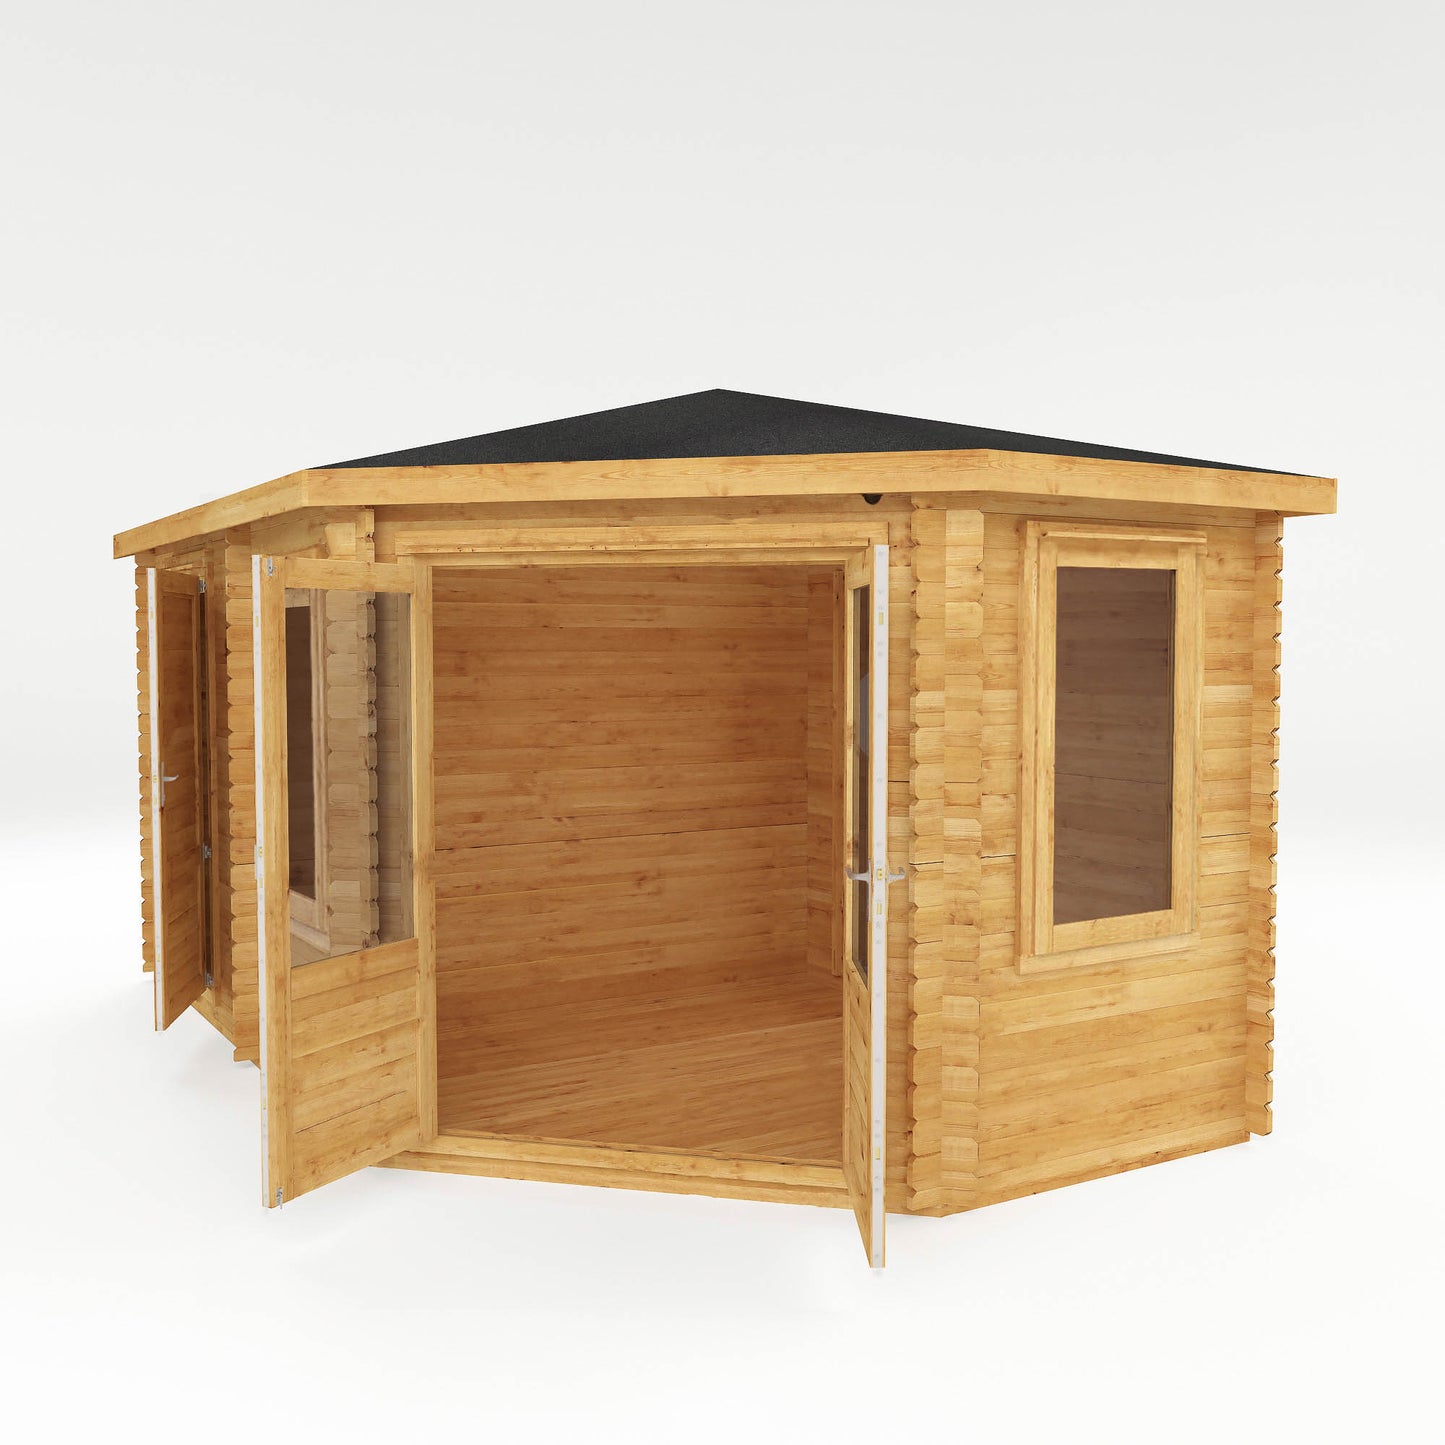 The Goldcrest 5m x 3m Log Cabin with Side Shed